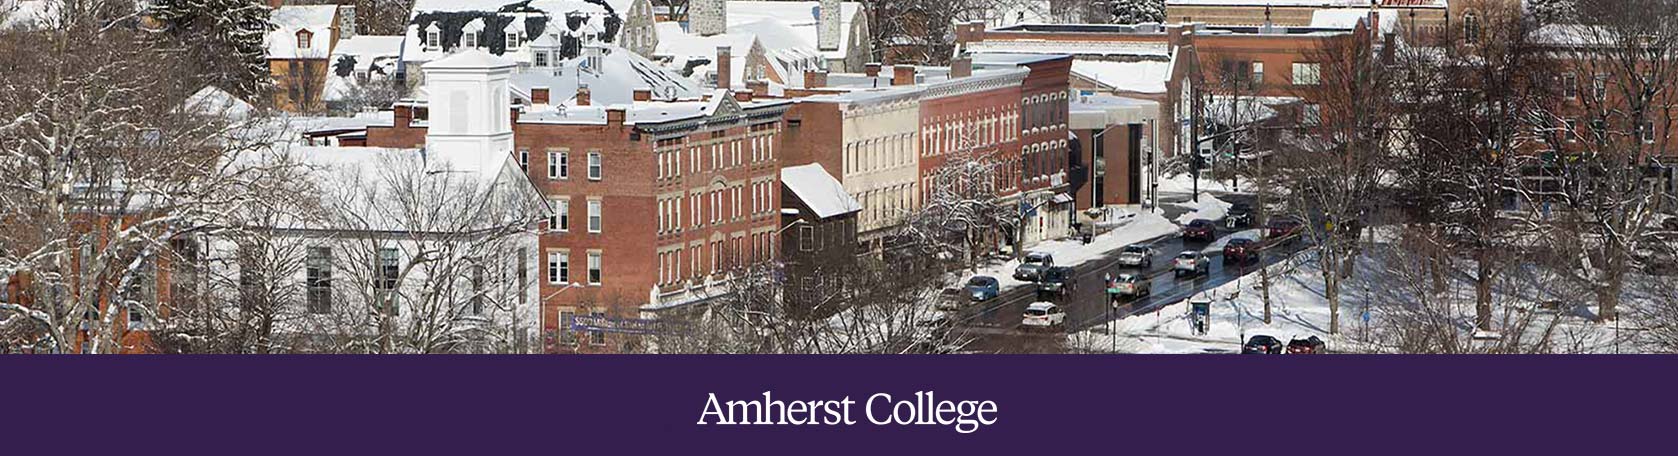 A panoramic view of the town of Amherst in winter.